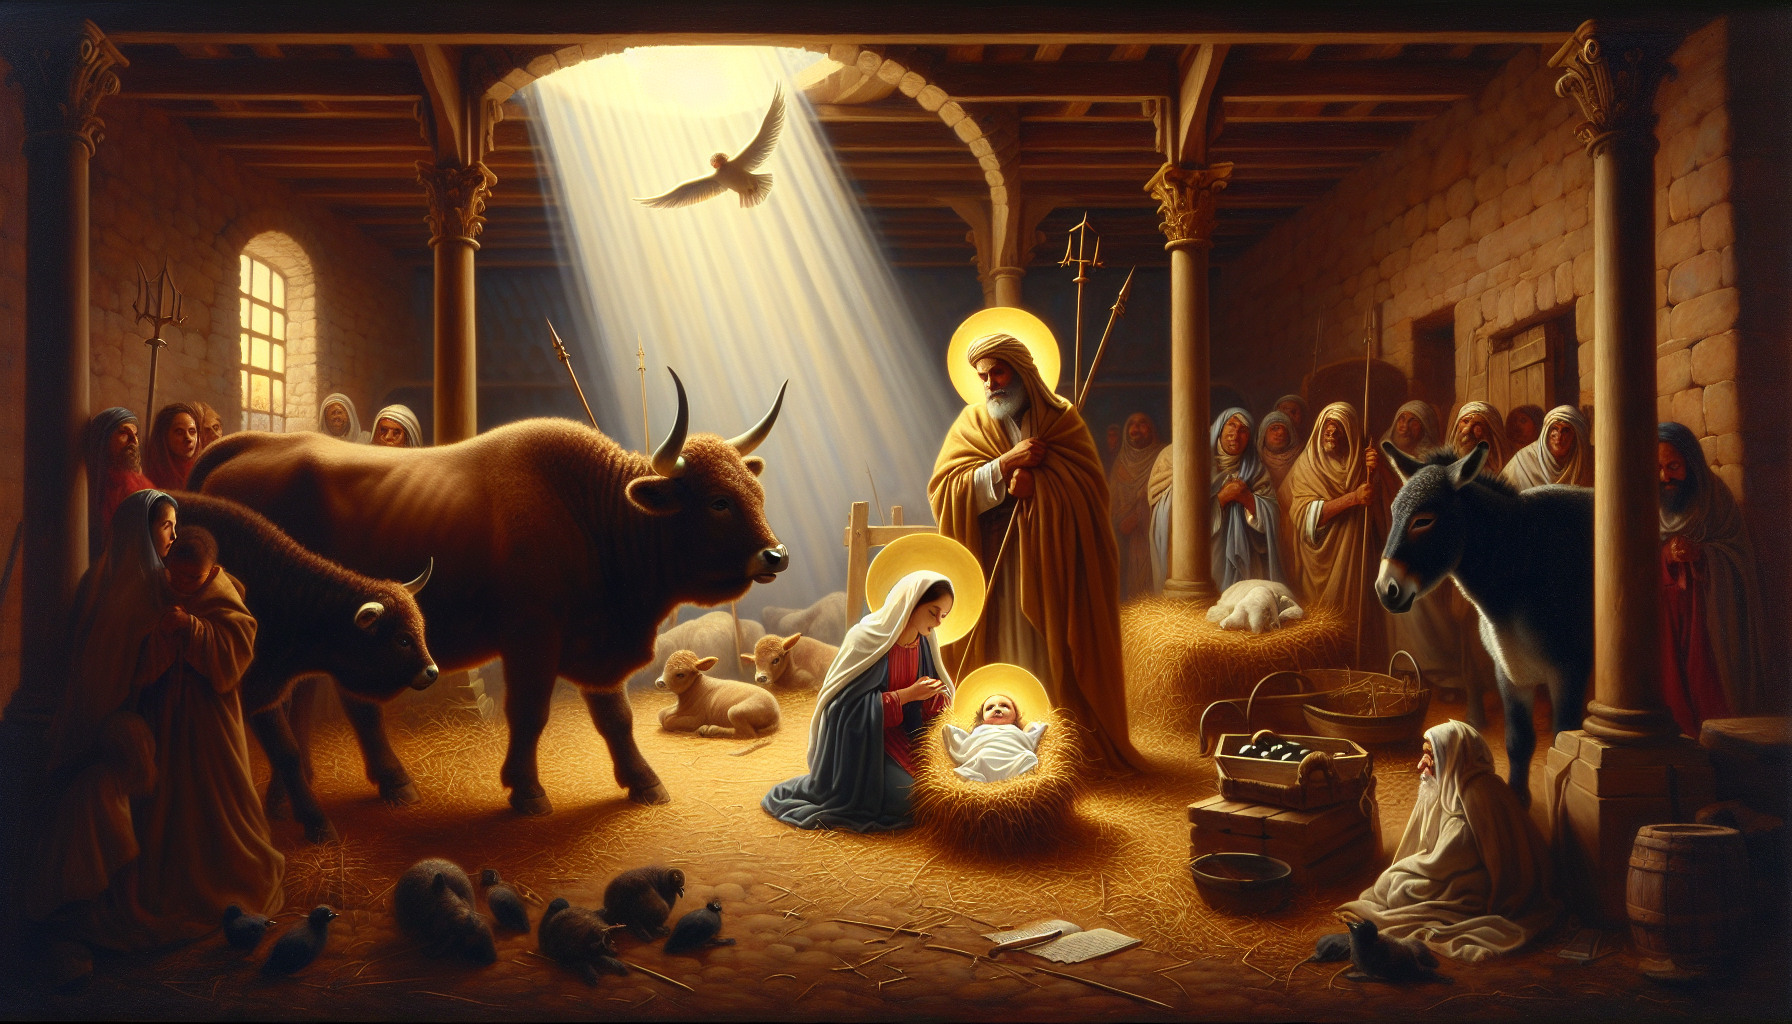 Create a classical, Renaissance-style painting depicting the Nativity of Jesus as described in Luke 2:1-7. Show Mary and Joseph in a humble stable, with baby Jesus lying in a manger. Surround them wit